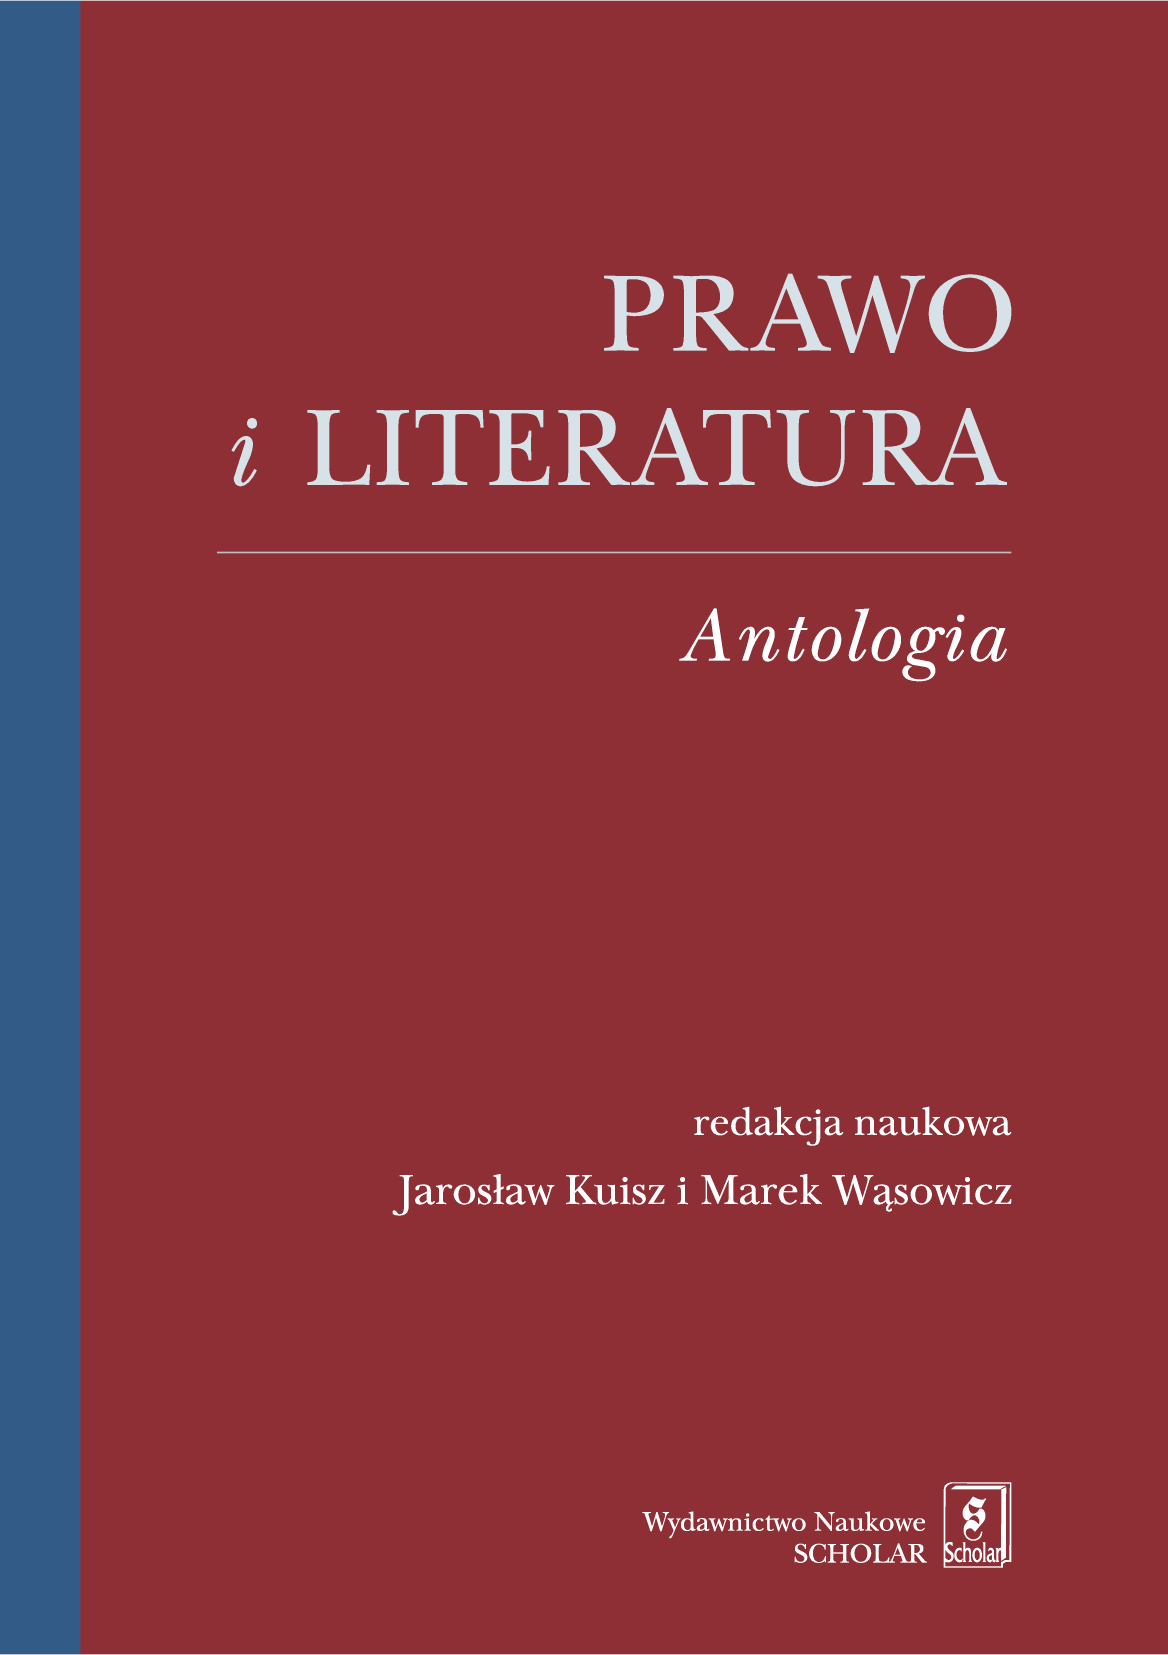 Law and literature. Cover Image